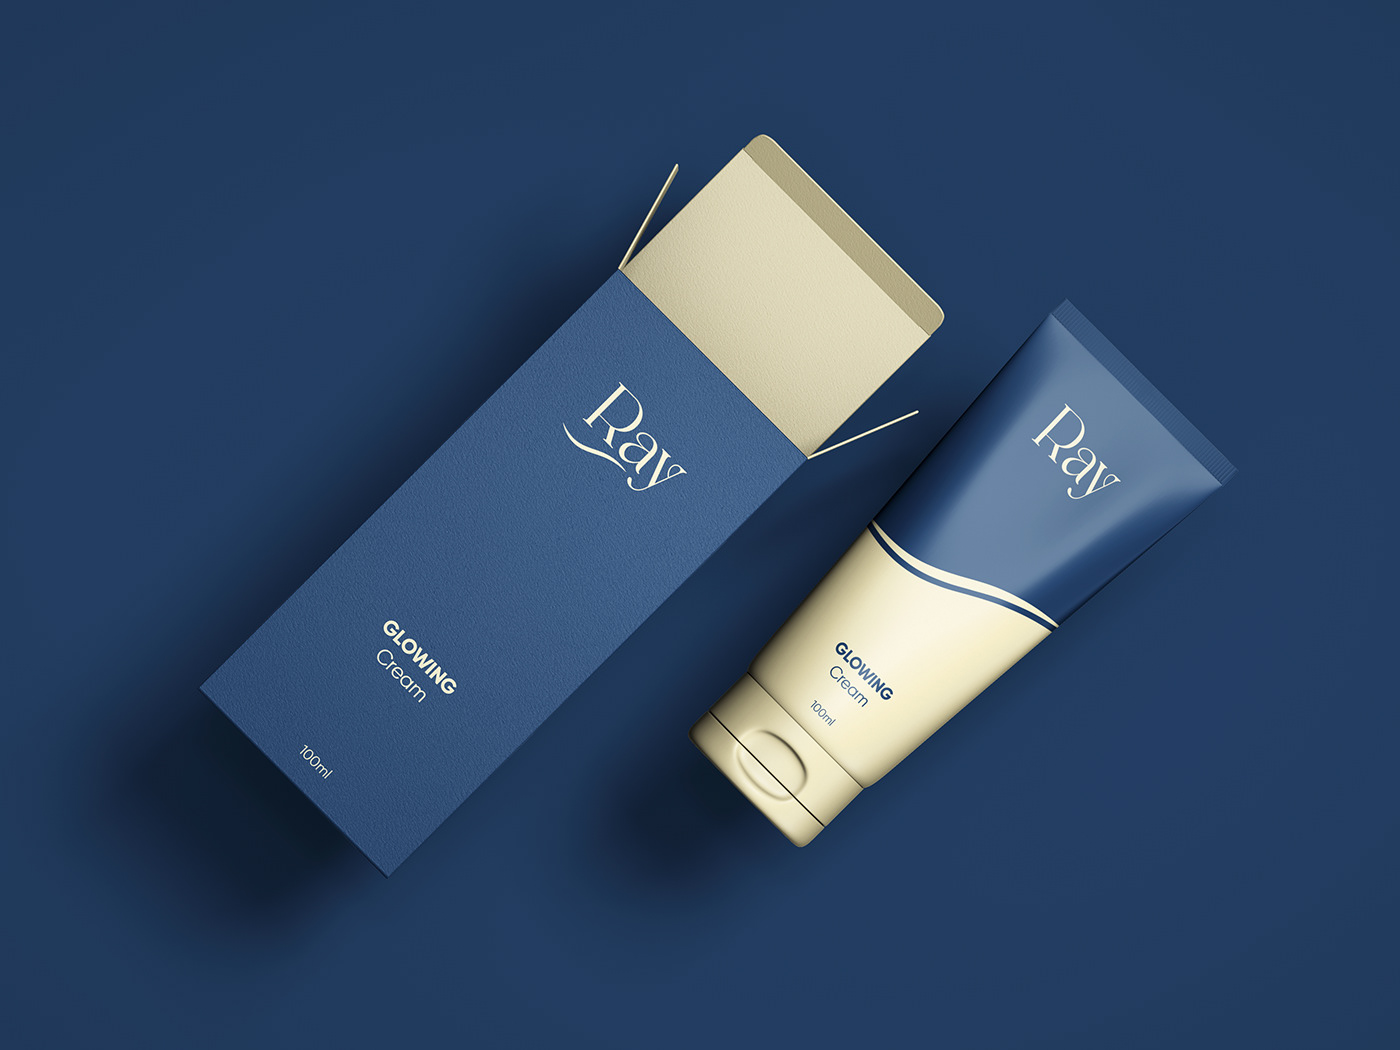 
The image displays the skincare brand's packaging design, featuring an eco-friendly and minimalist 